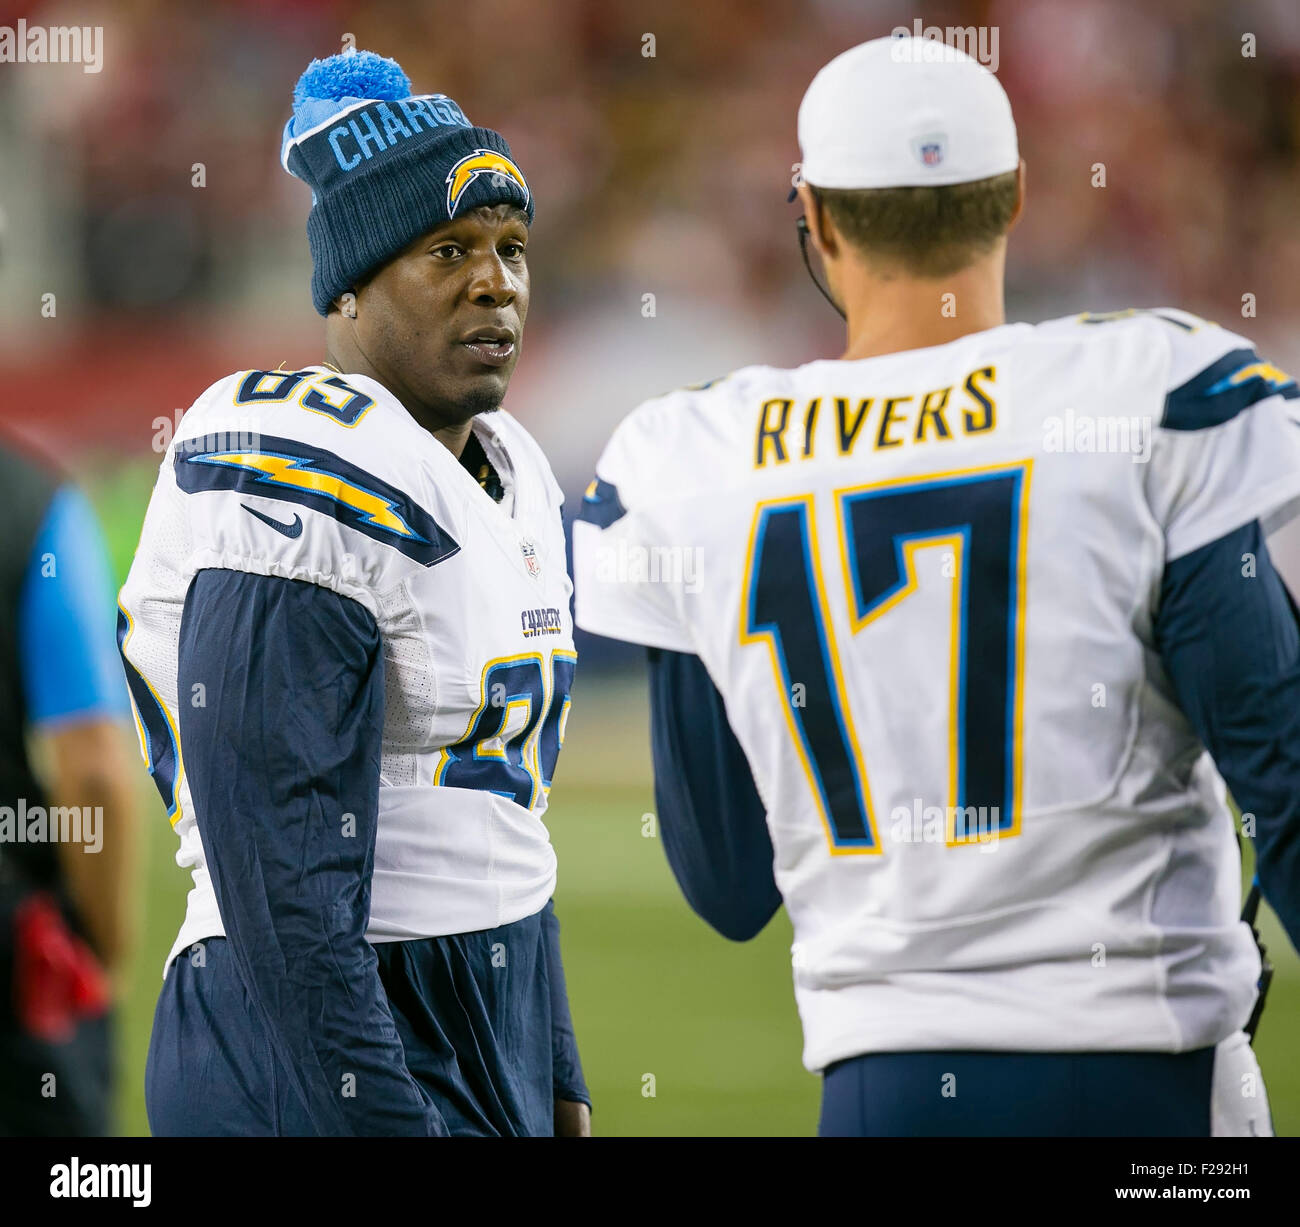 Santa Clara, CA. 3rd Sep, 2015. San Diego Chargers tight end Antonio Gates (85) talks to San Diego Chargers quarterback Philip Rivers (17) on the sideline during the NFL football game between the San Diego Chargers and the San Francisco 49ers at Levi's Stadium in Santa Clara, CA. The Niners defeated the Chargers 14-12. Damon Tarver/Cal Sport Media/Alamy Live News Stock Photo